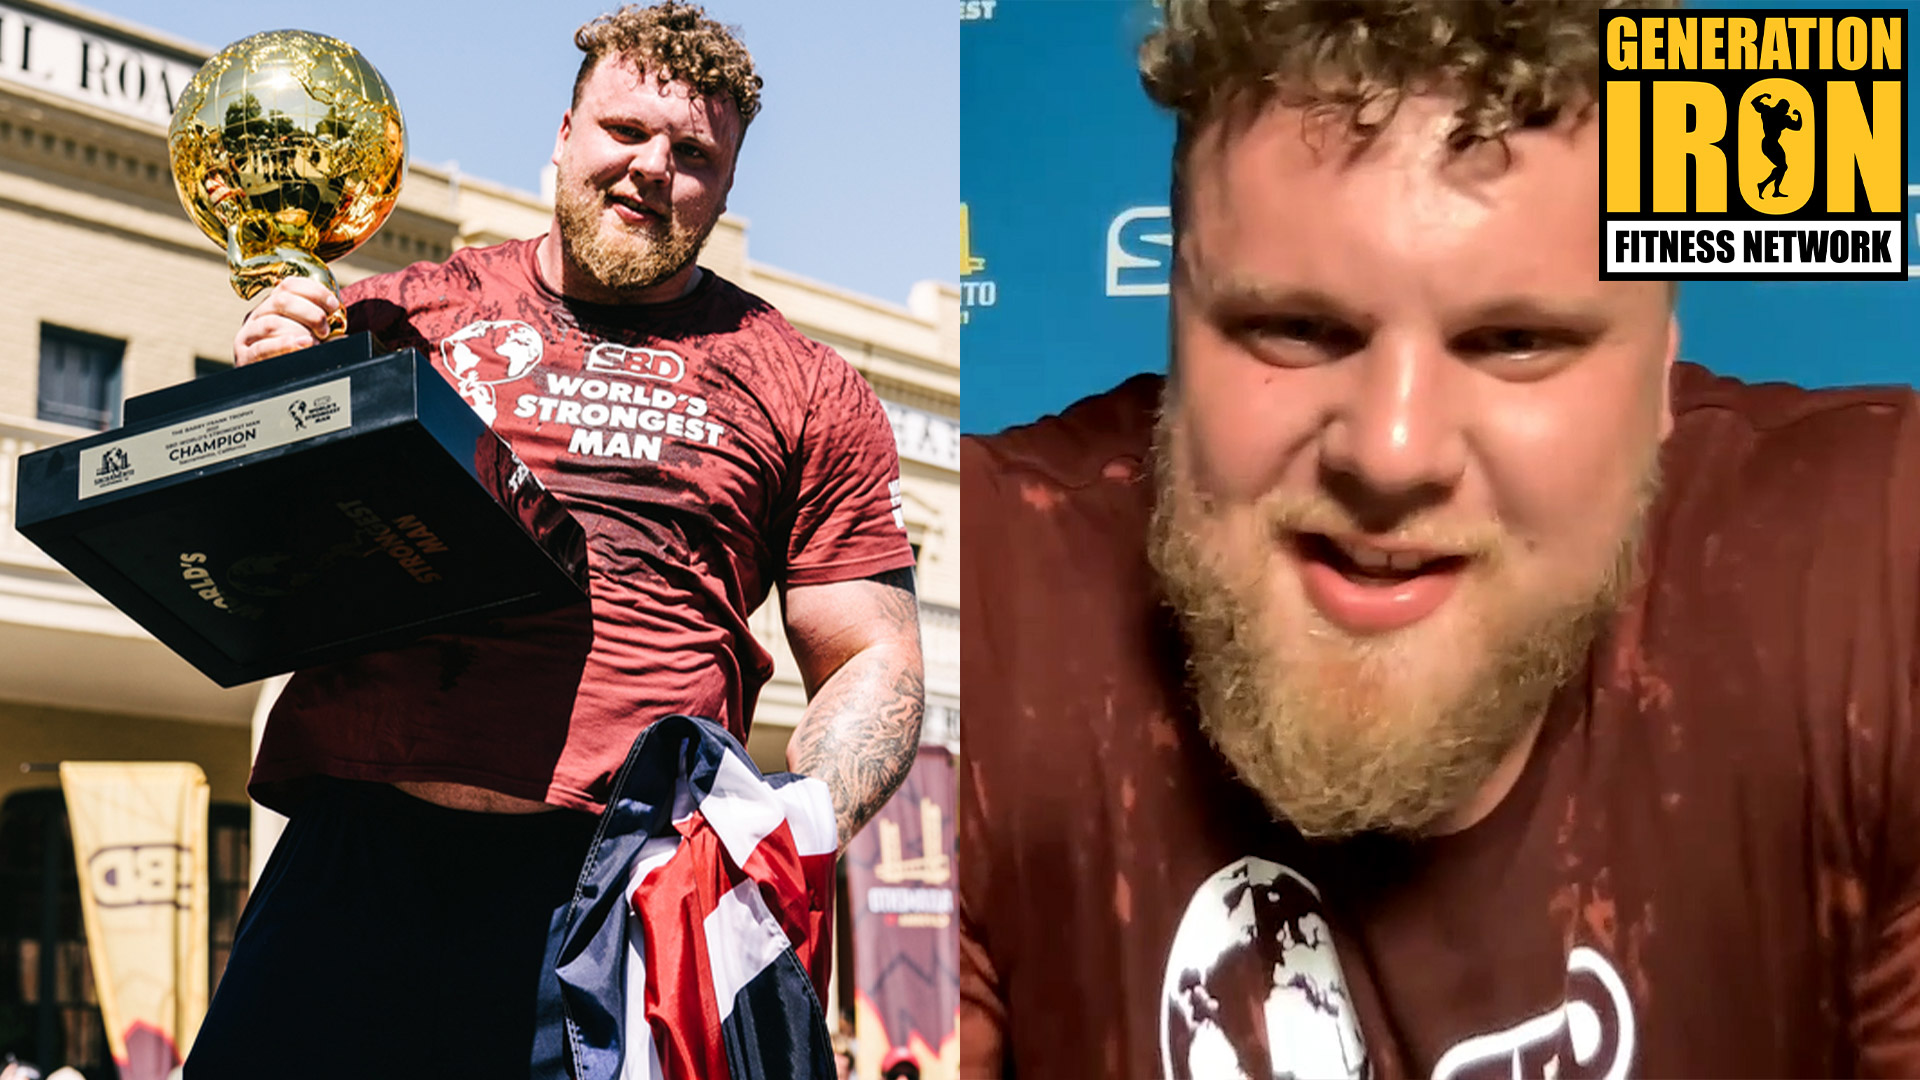 INTERVIEW: Tom Stoltman “Went To Places No Human Being Wants To Go” For World’s Strongest Man 2021